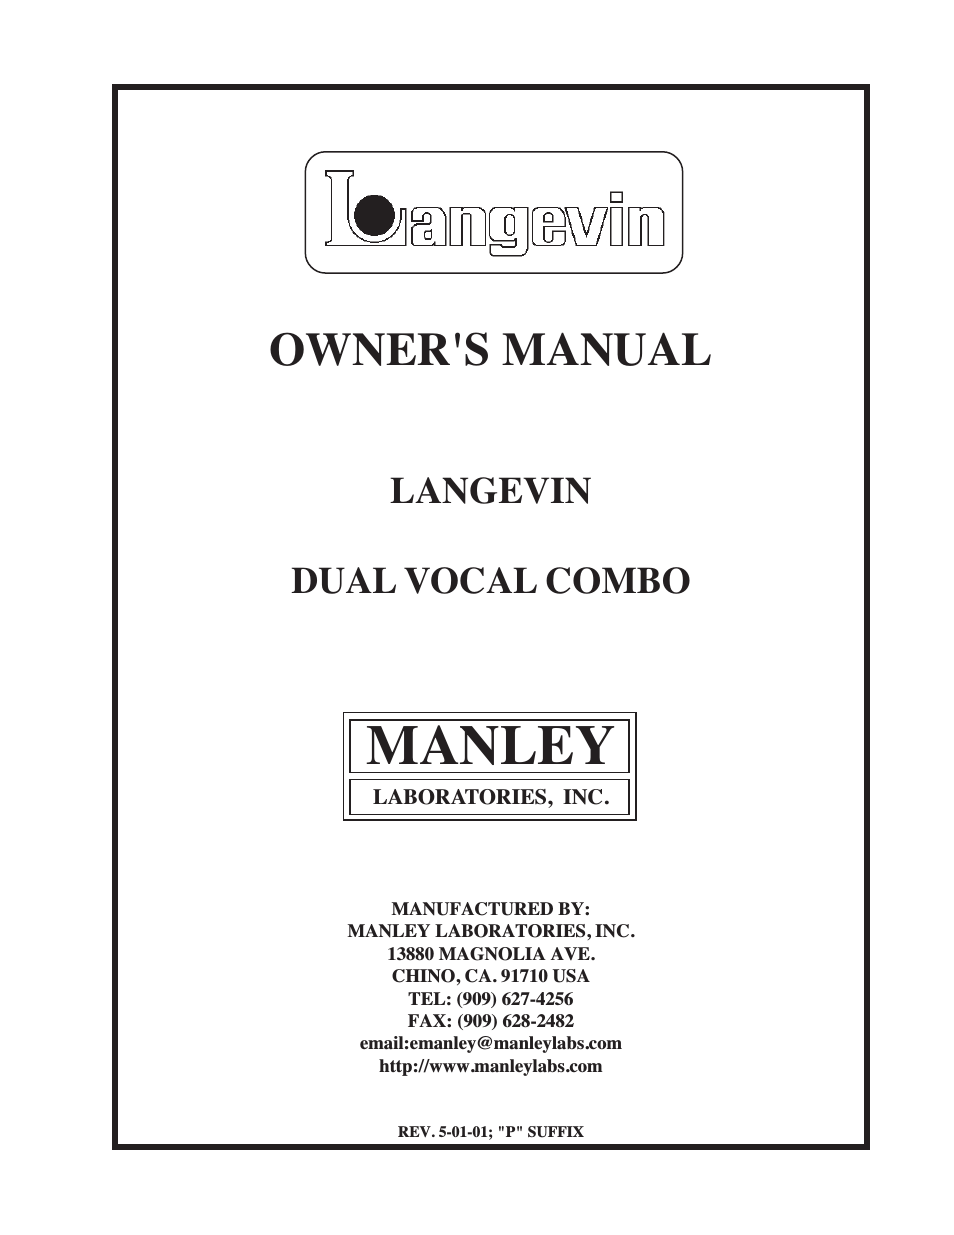 Langevin Dual Vocal Combo 4/2001 - present LDVCP179 and up